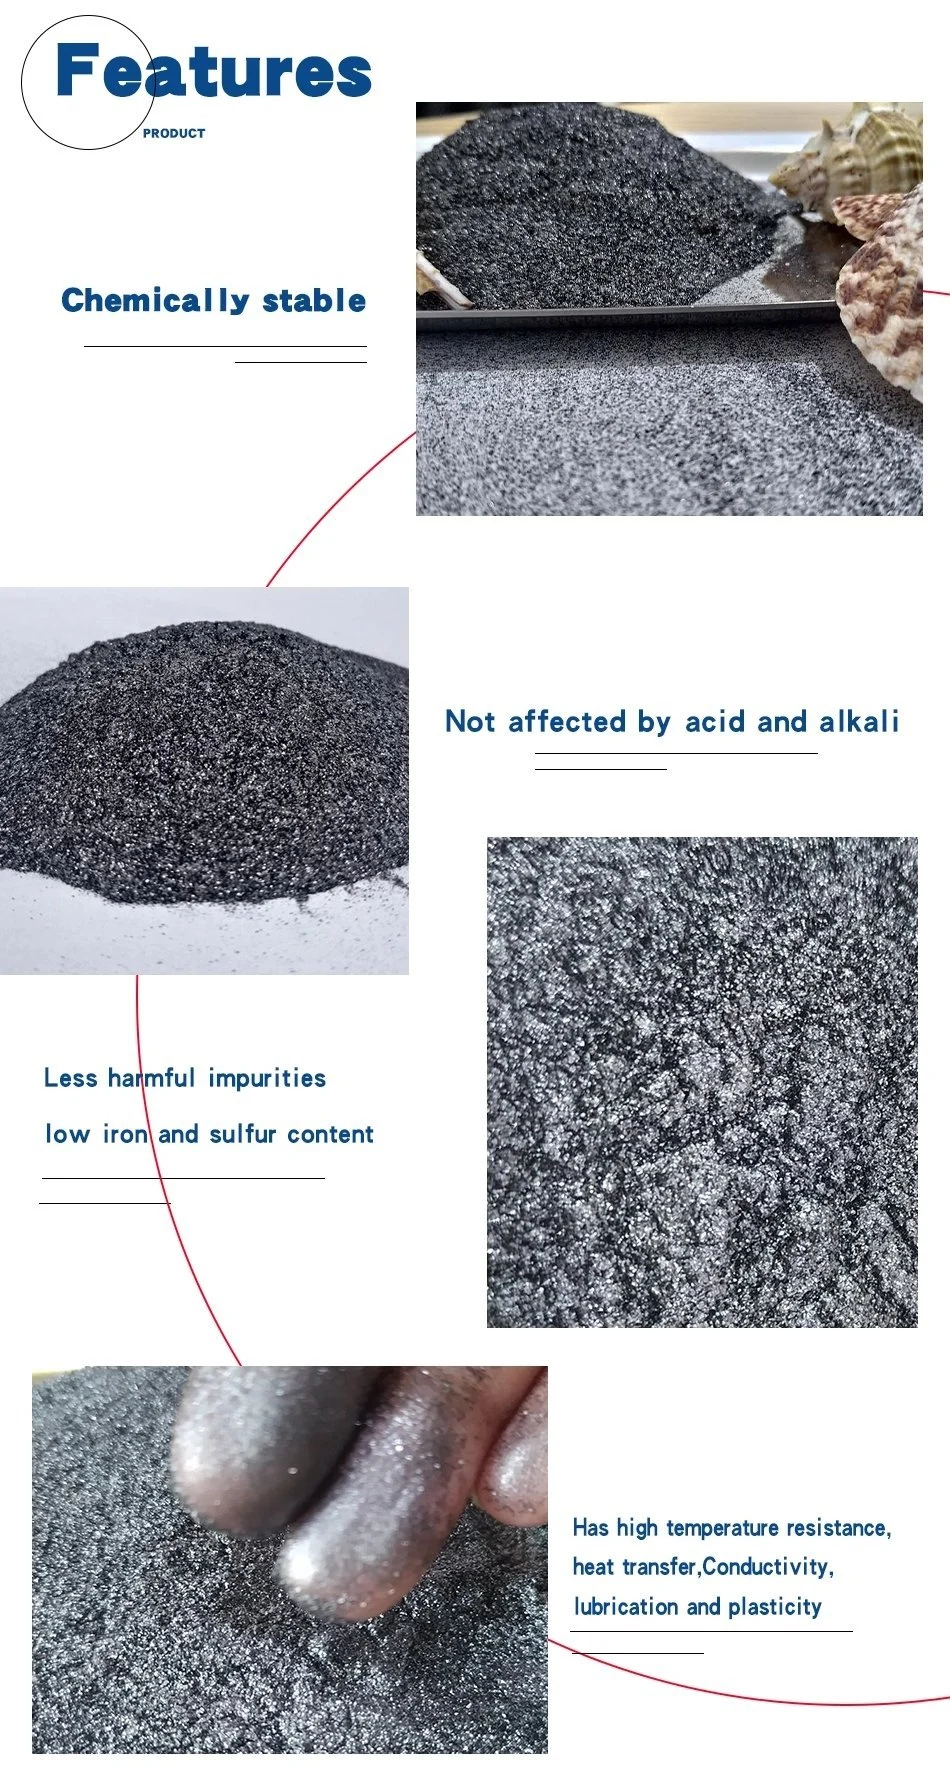 Firestop Material Use Expandable Graphite Natural Flake Expandable Graphite Price